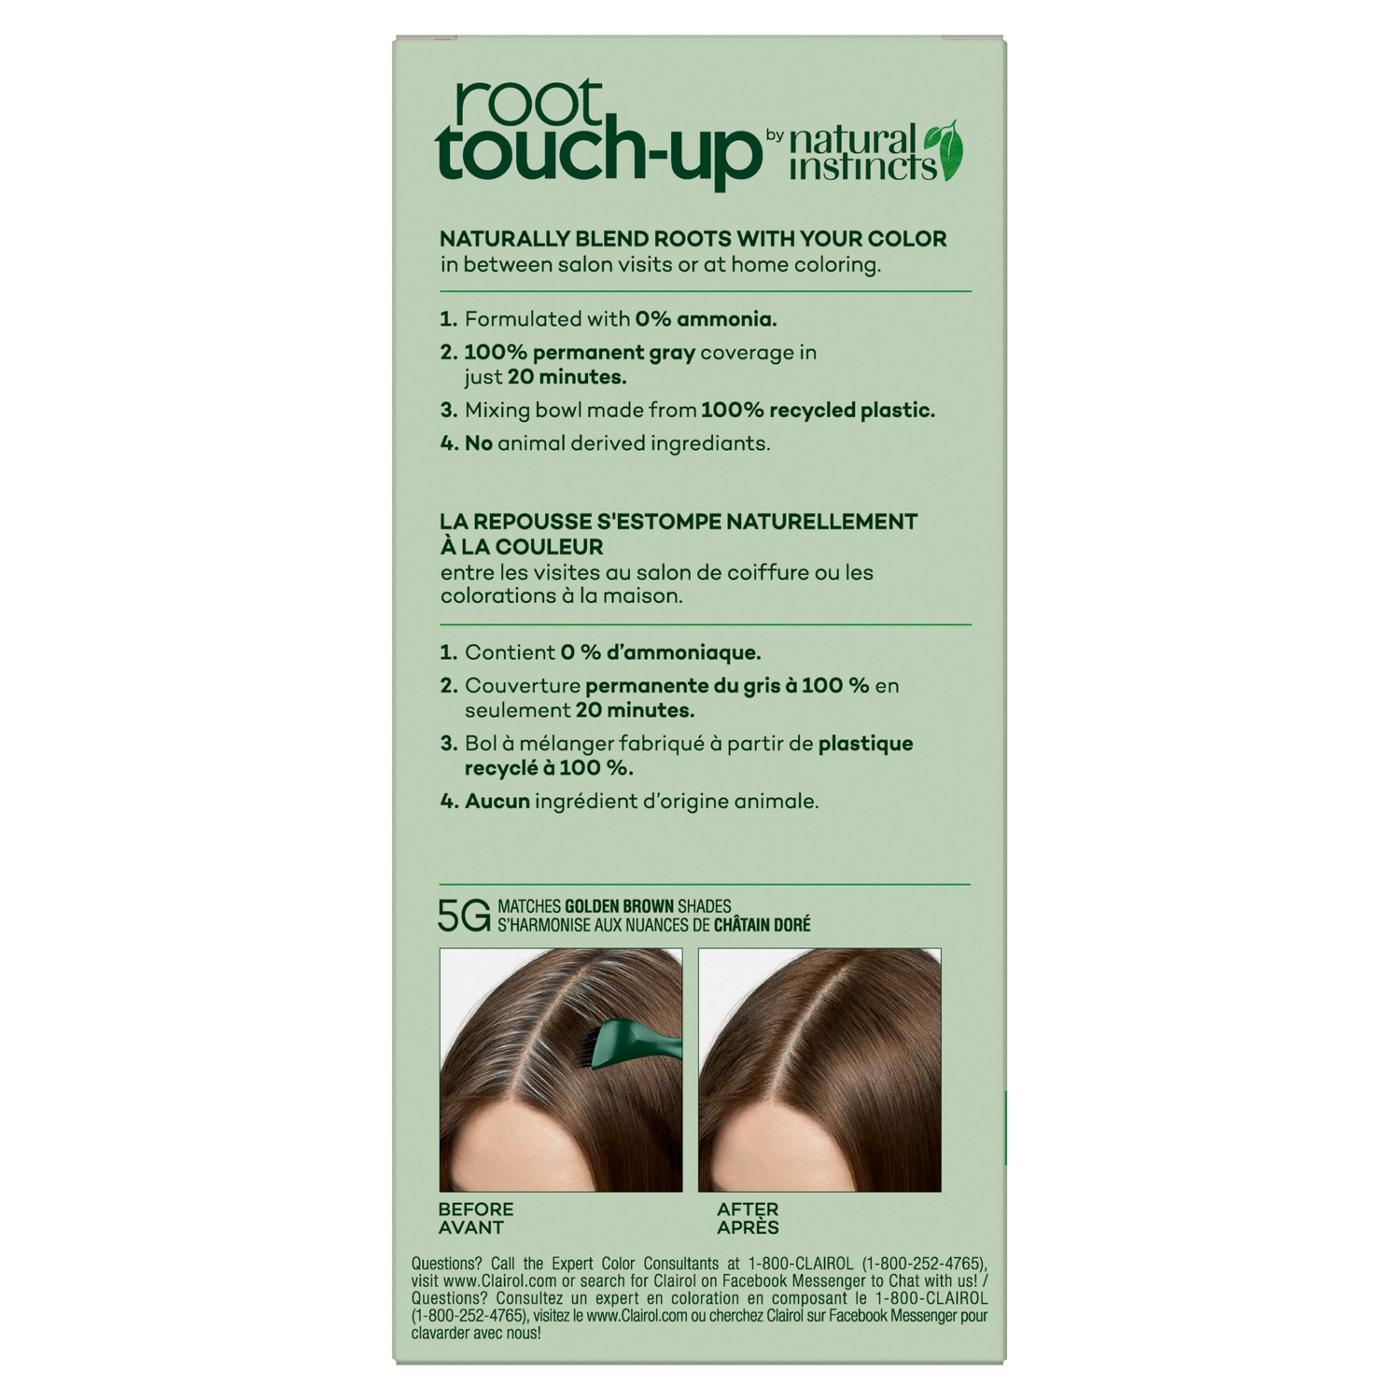 Clairol Root Touch-Up by Natural Instincts Ammonia-Free Permanent Hair Color 5G Matches Golden Brown Shades; image 3 of 3